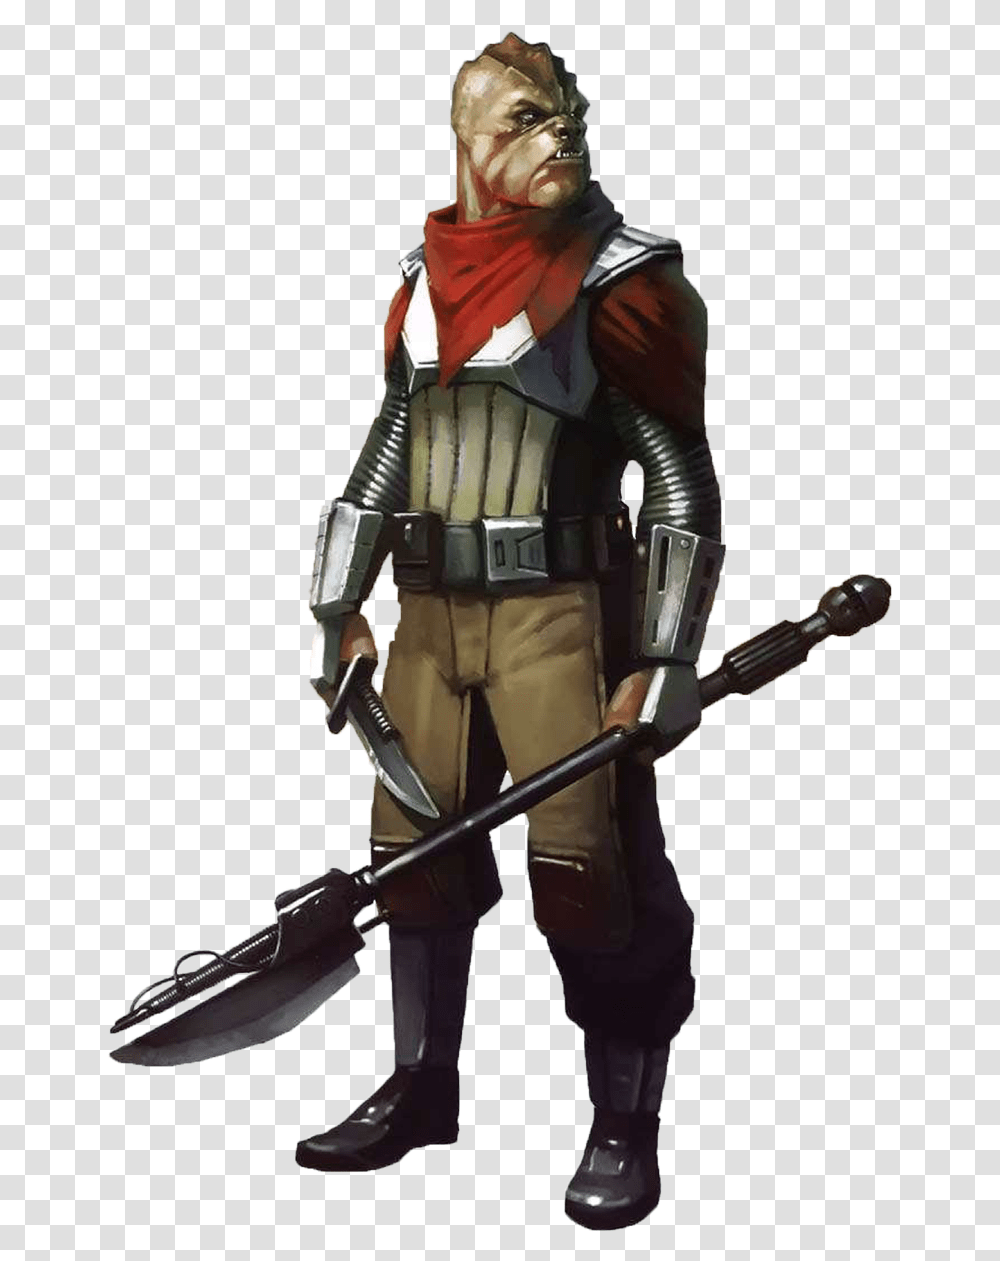 Star Wars Characters Star Wars Rpg Character, Person, Human, Armor, Suit Transparent Png